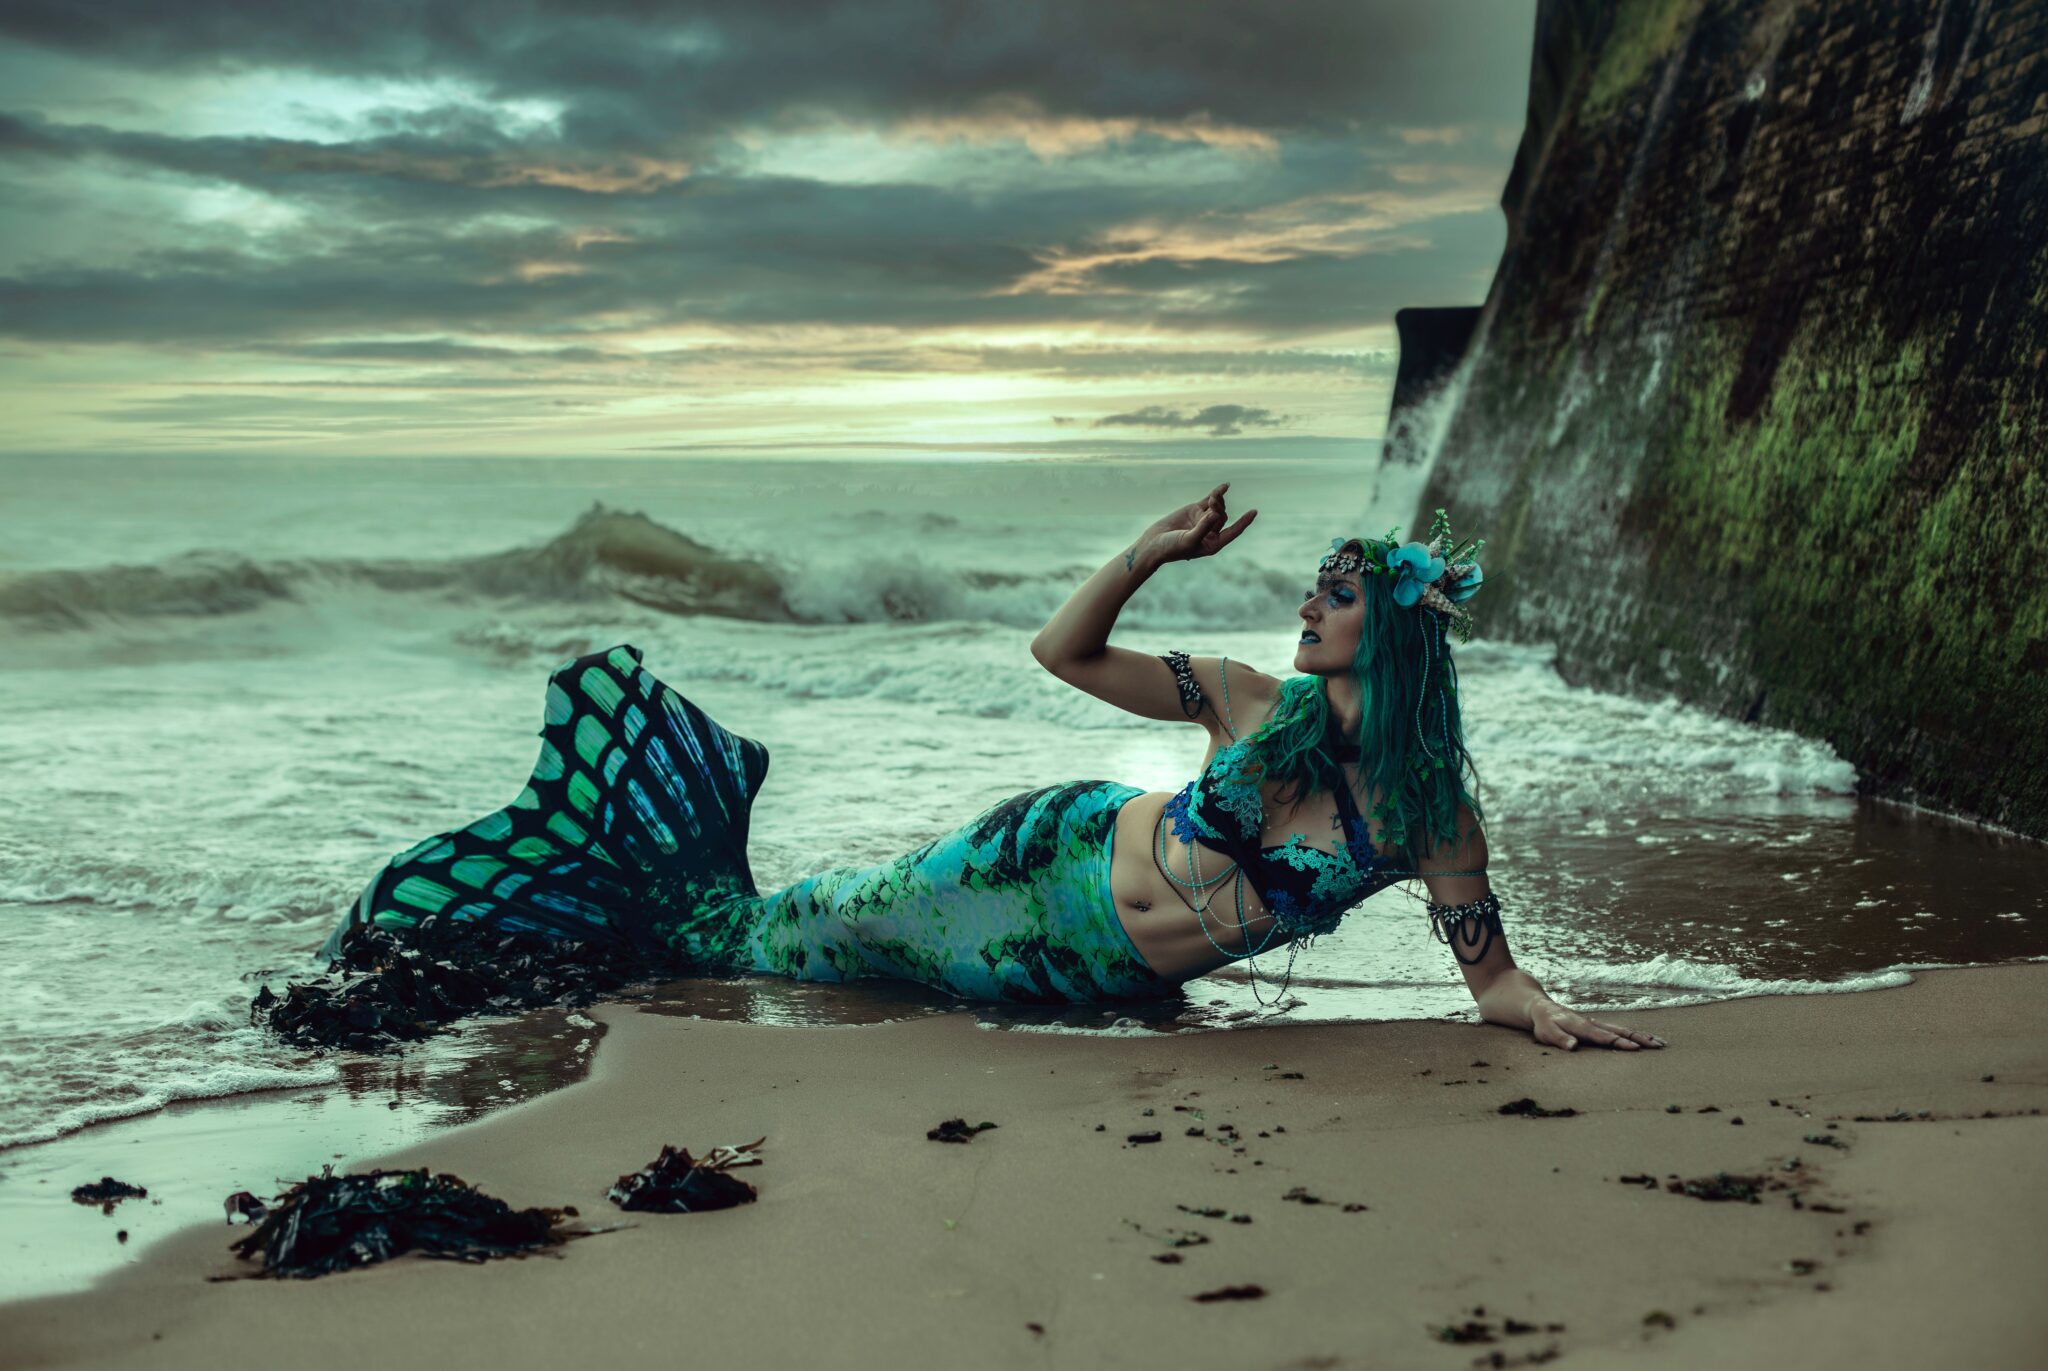 mermaid images to inspire